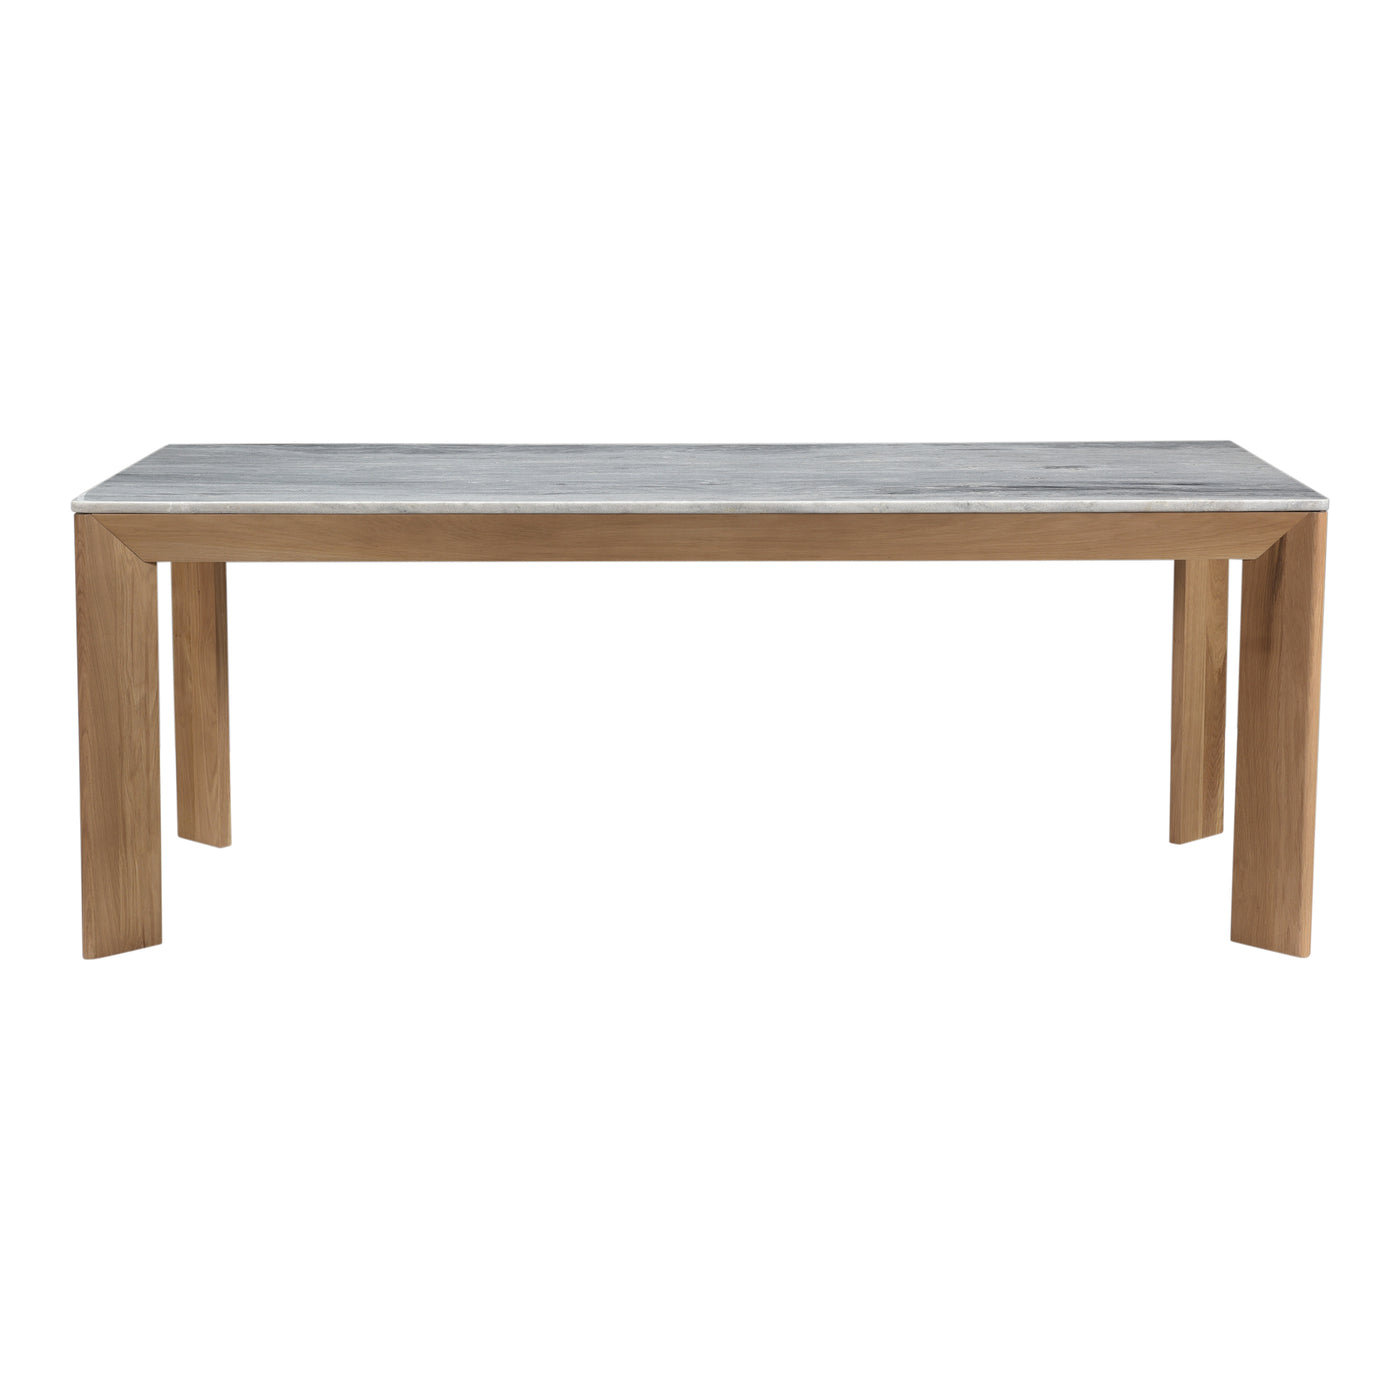 Foreword facing modern style or comfortable familiarity- is it too much to ask for both? The Angle dining table throws thi...